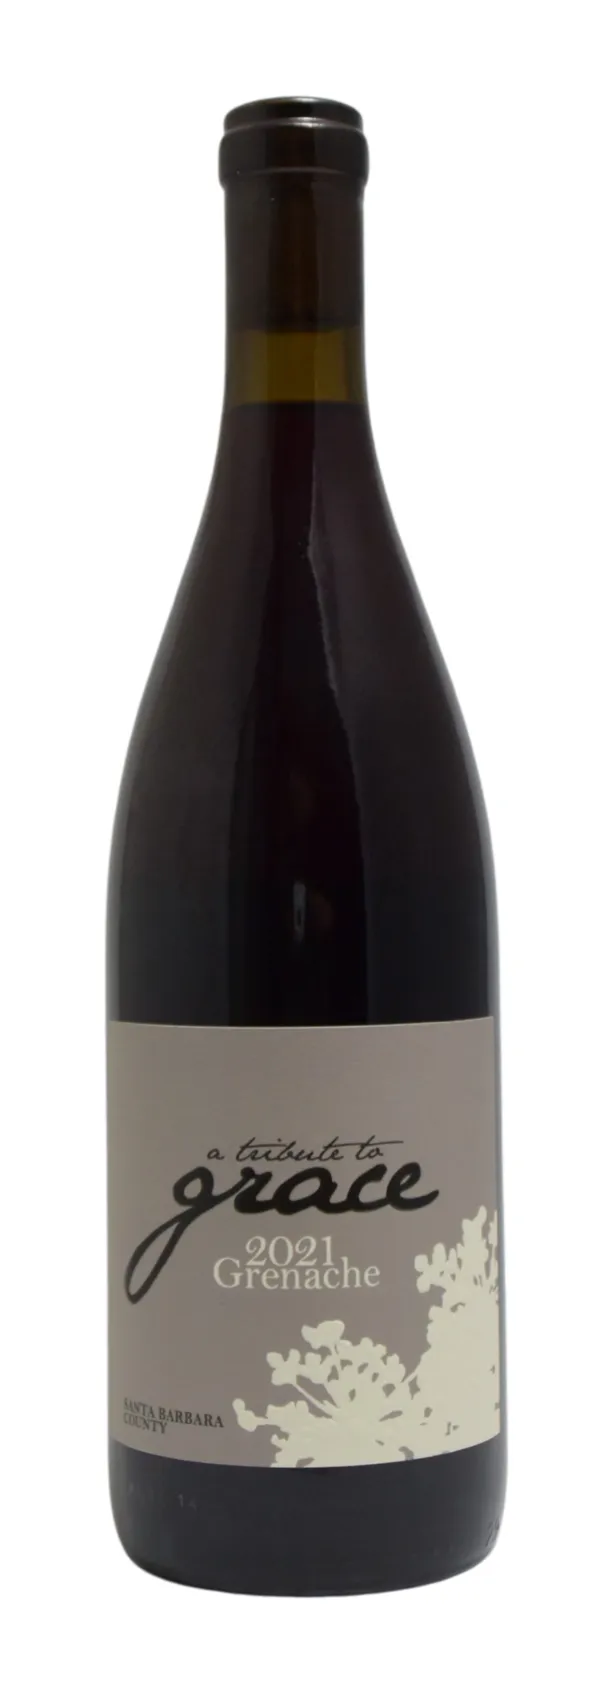 Bottle of A Tribute to Grace Grenachewith label visible